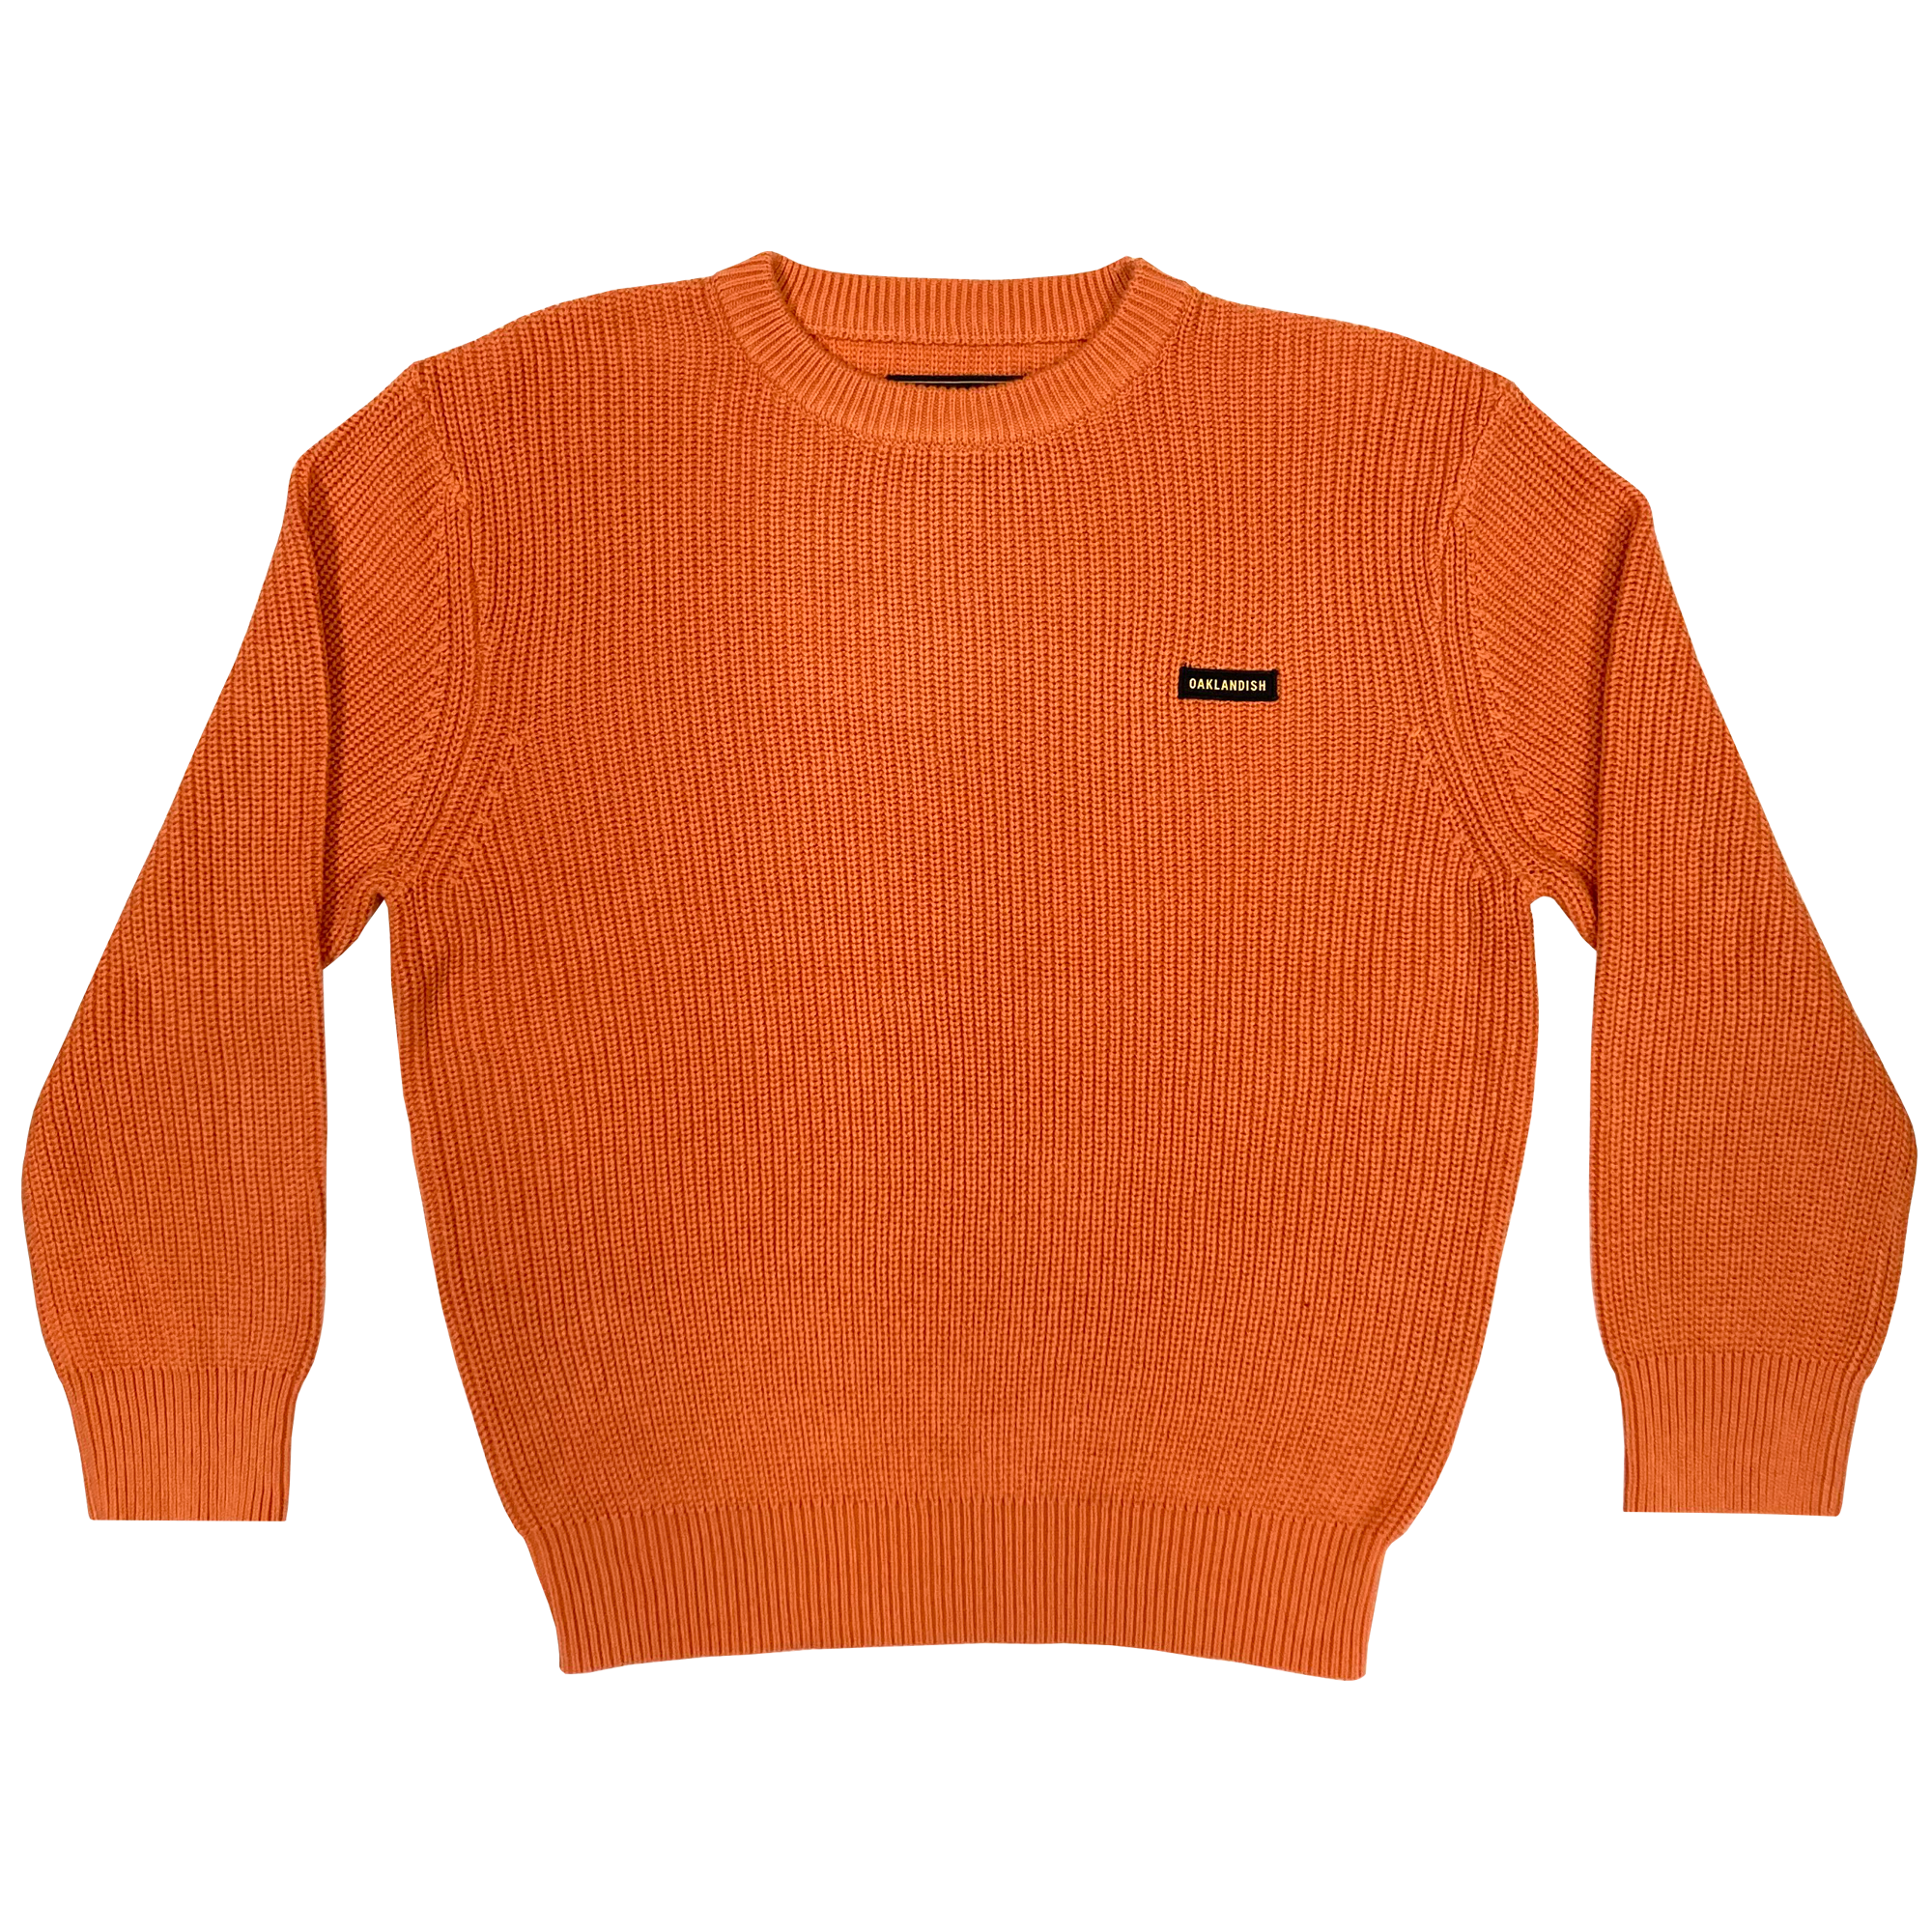 Heavy cotton knit sweater with embroidered Oaklandish wordmark woven label patch on front left chest in autumn orange.